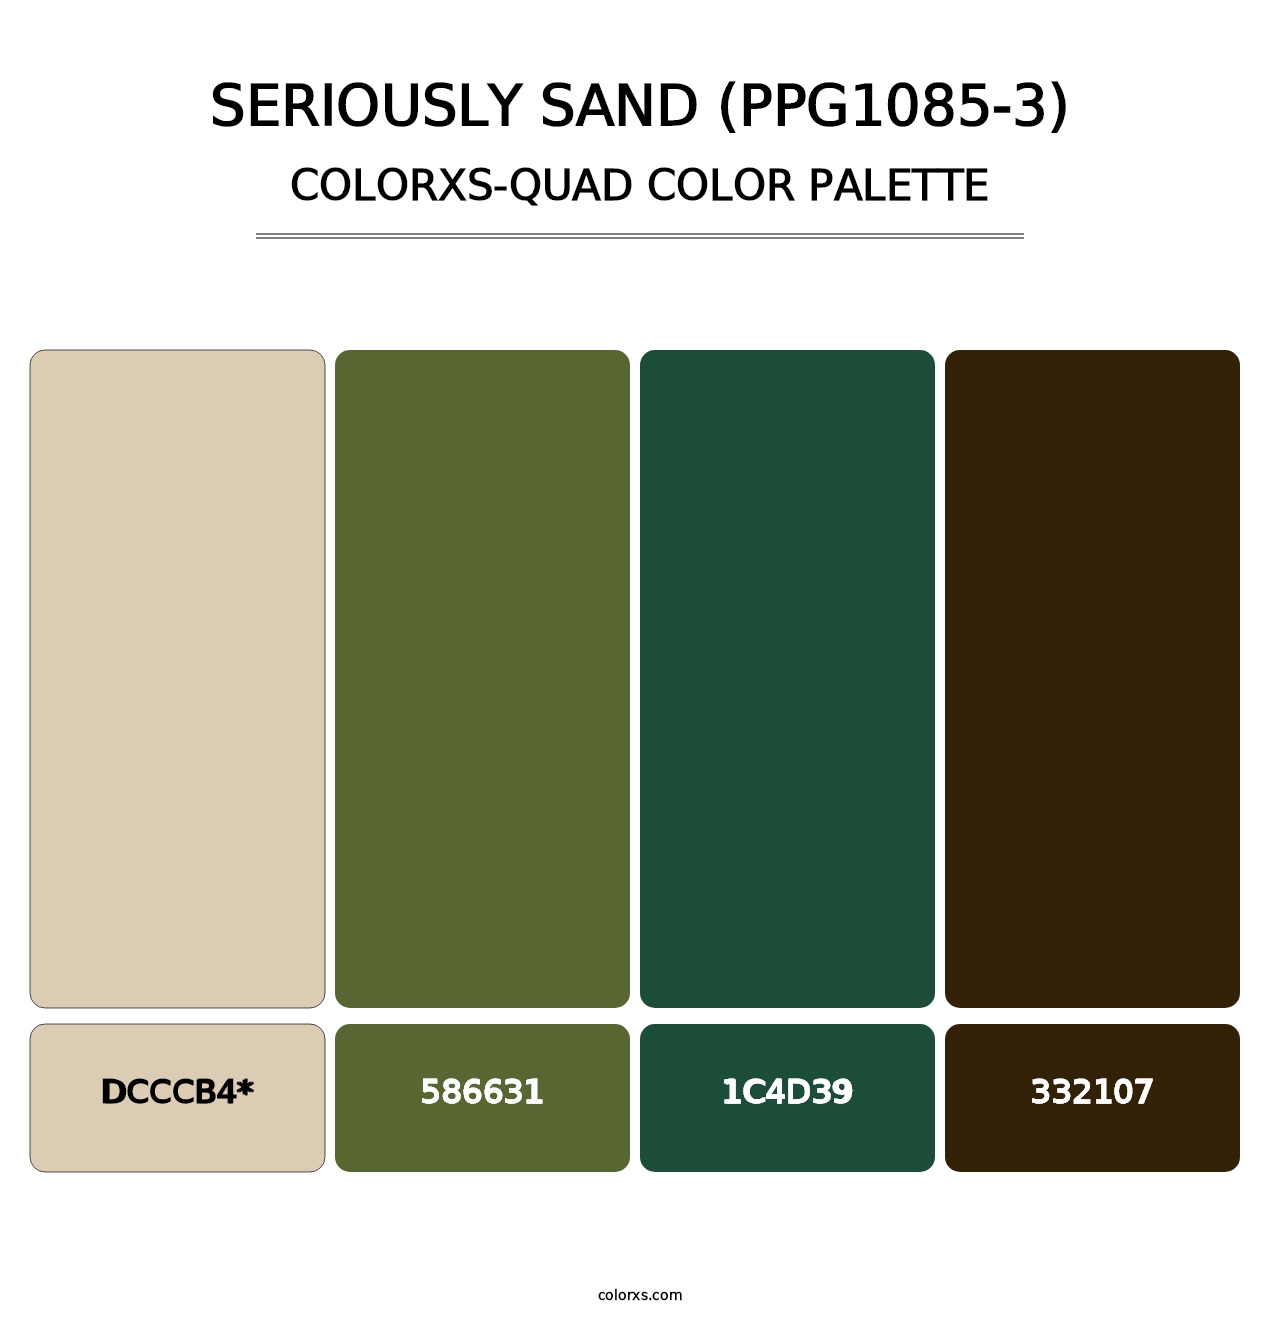 Seriously Sand (PPG1085-3) - Colorxs Quad Palette